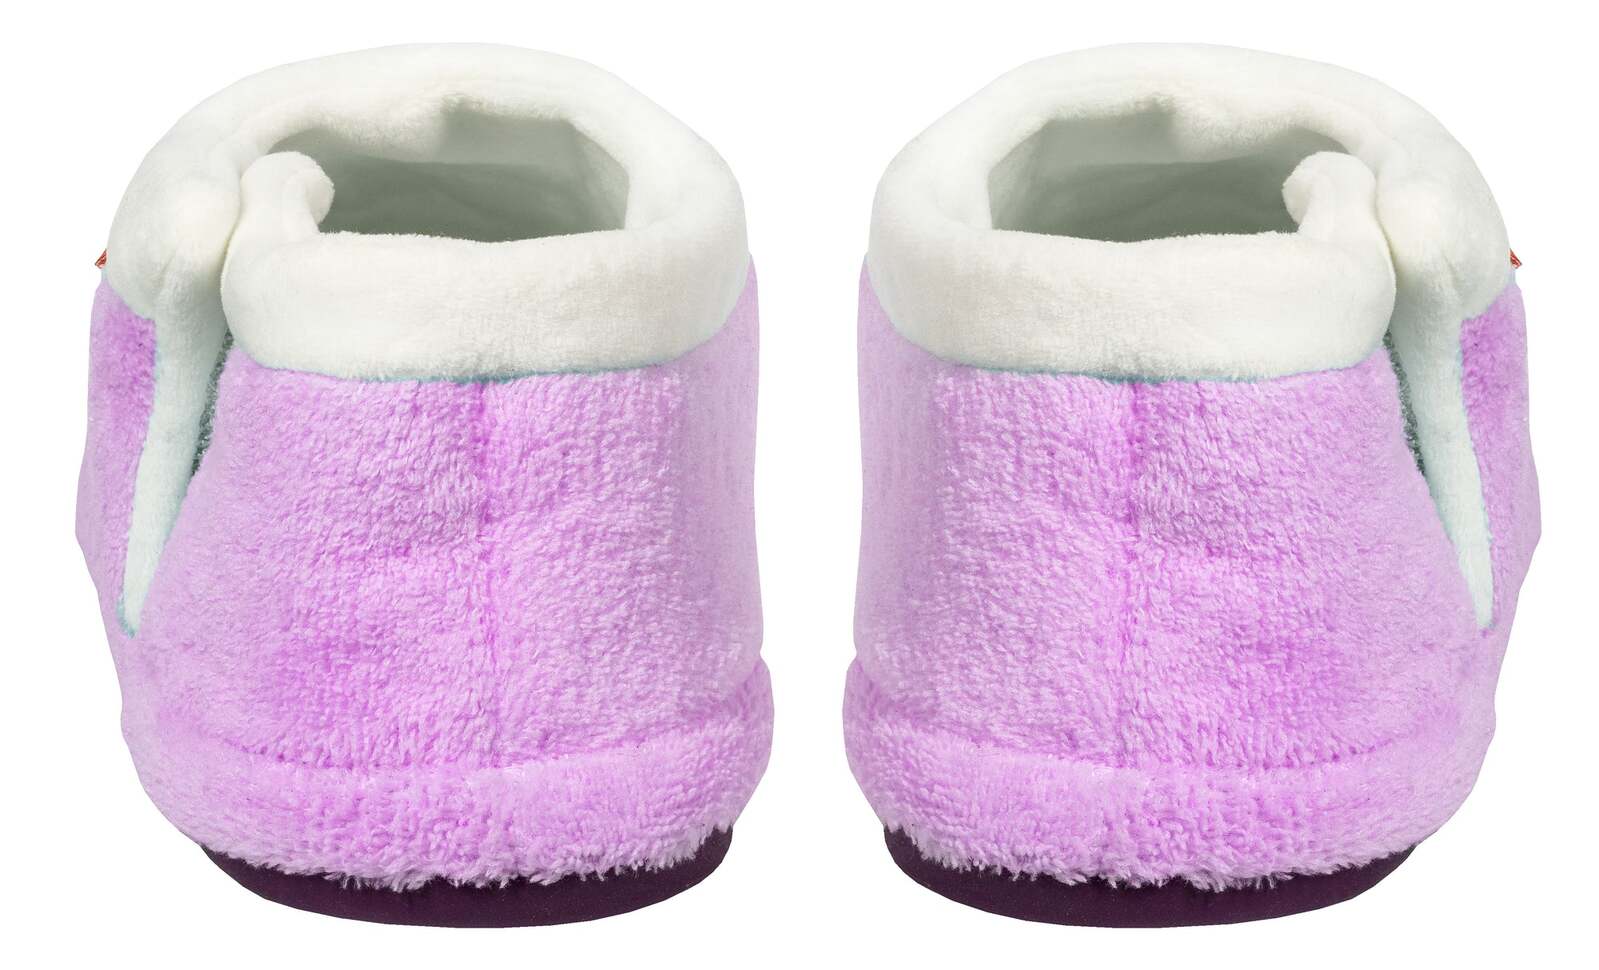 ARCHLINE Orthotic Slippers CLOSED Arch Scuffs Pain Relief Moccasins - Lilac - EU 36